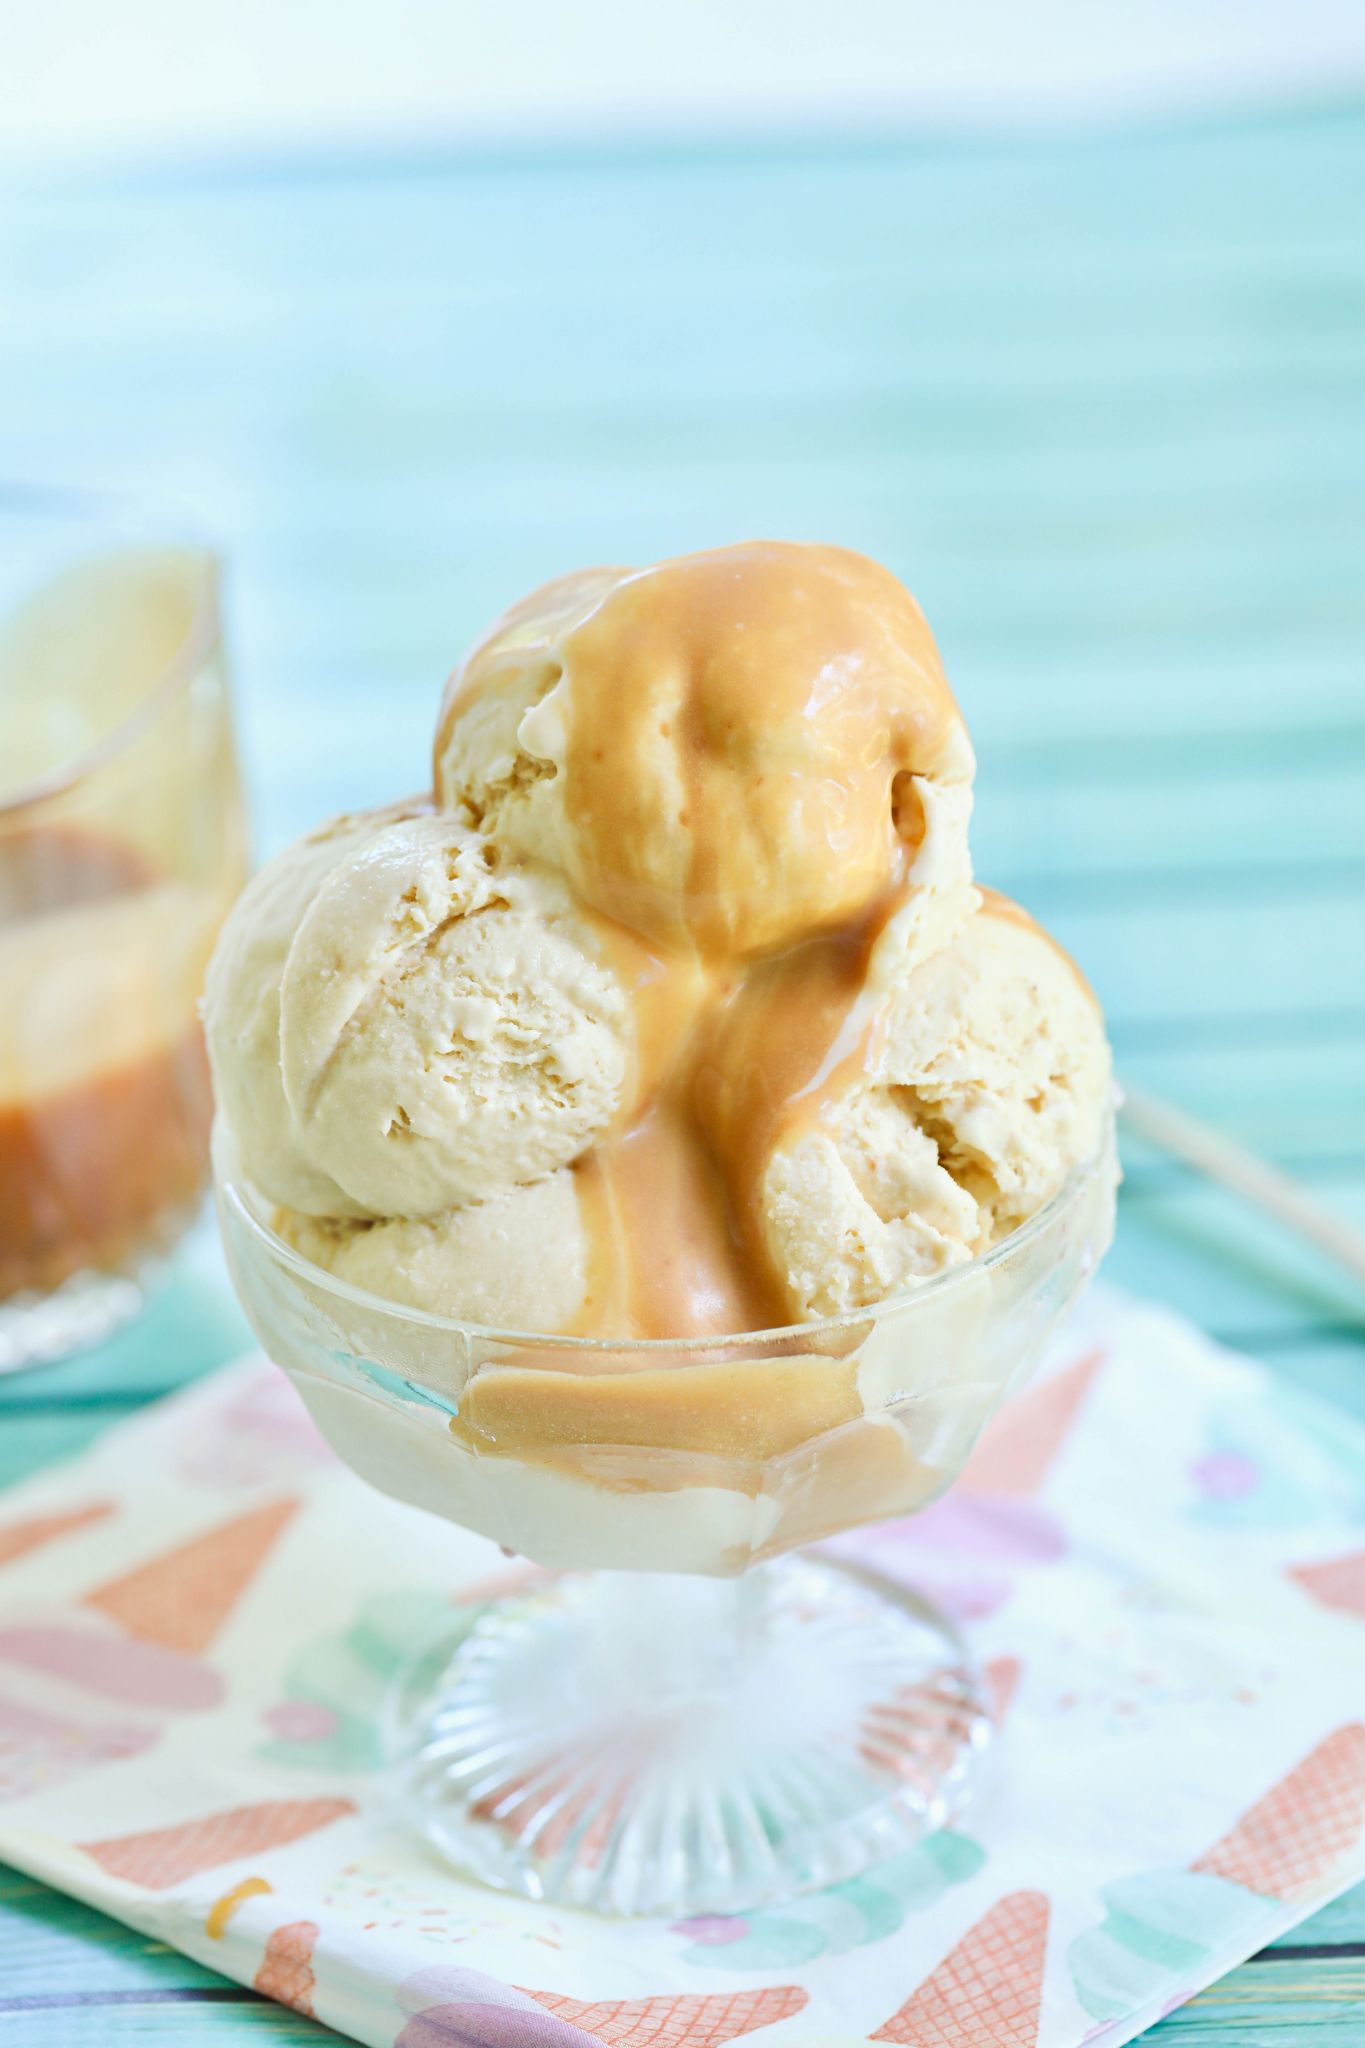 Salted Caramel Gelato recipe, topped with Salted Caramel sauce.